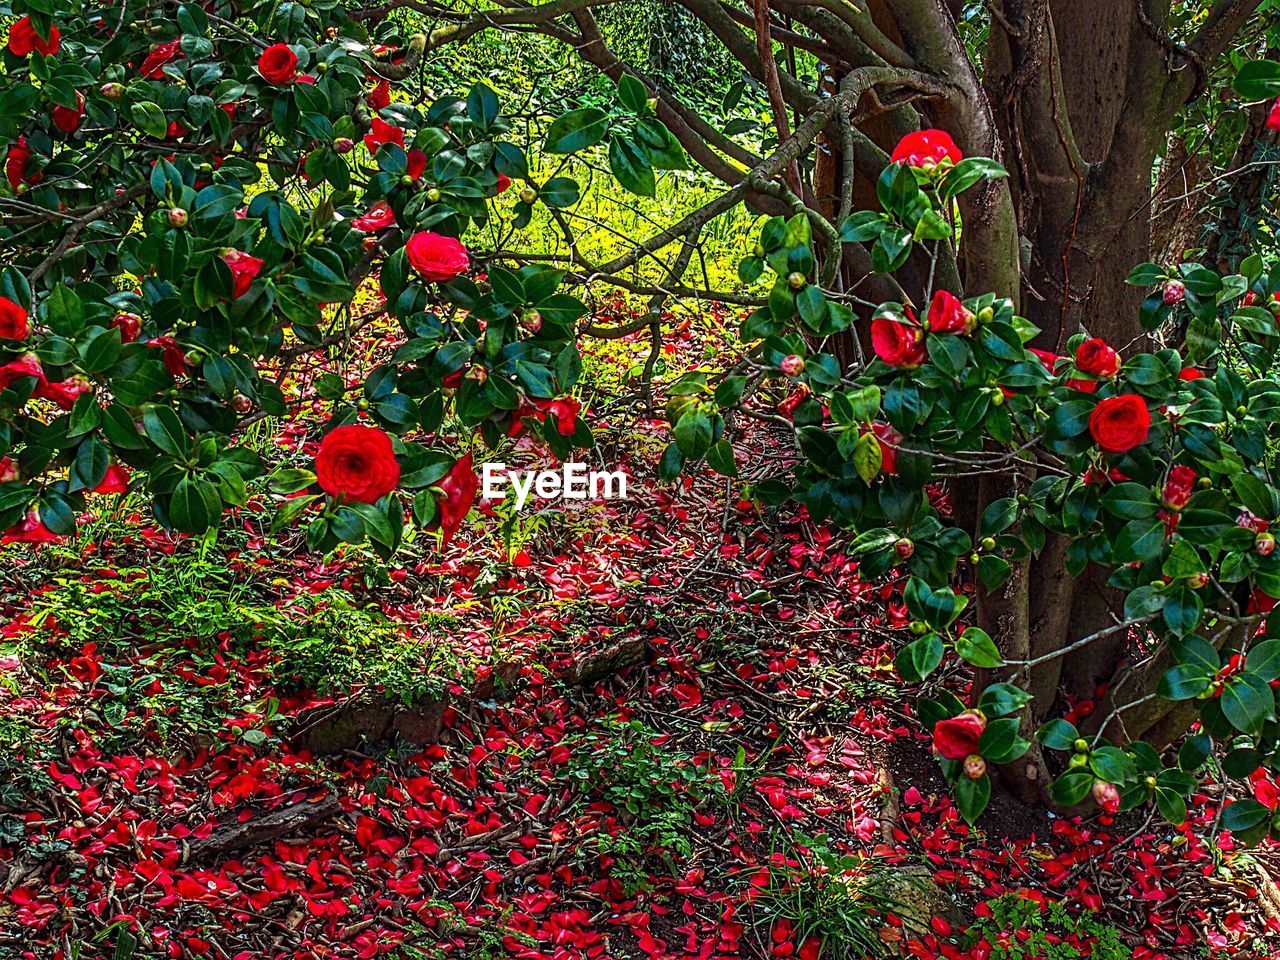 RED FLOWERS GROWING ON TREE